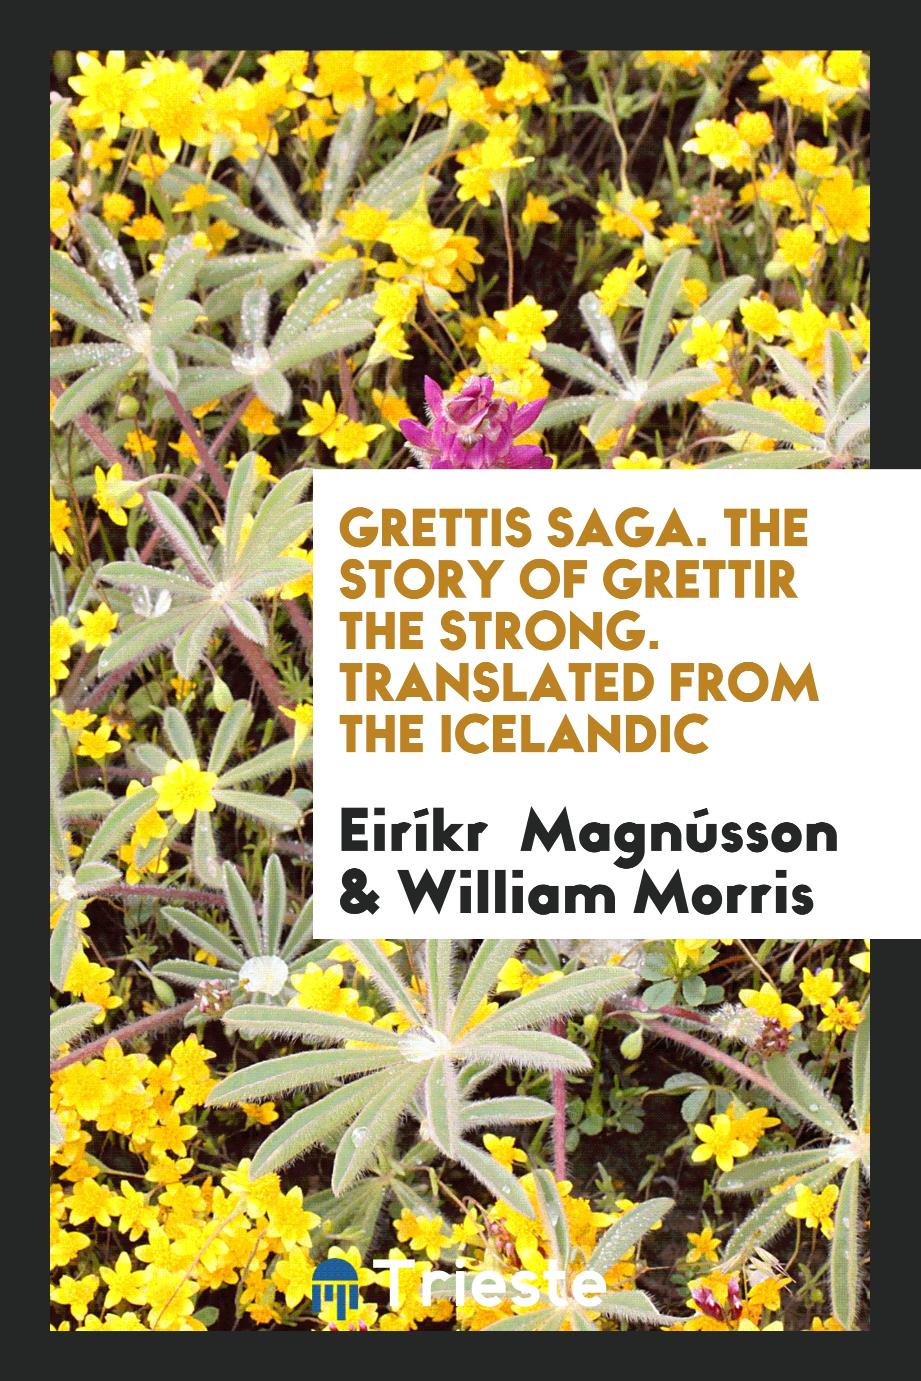 Grettis Saga. The Story of Grettir the Strong. Translated from the Icelandic